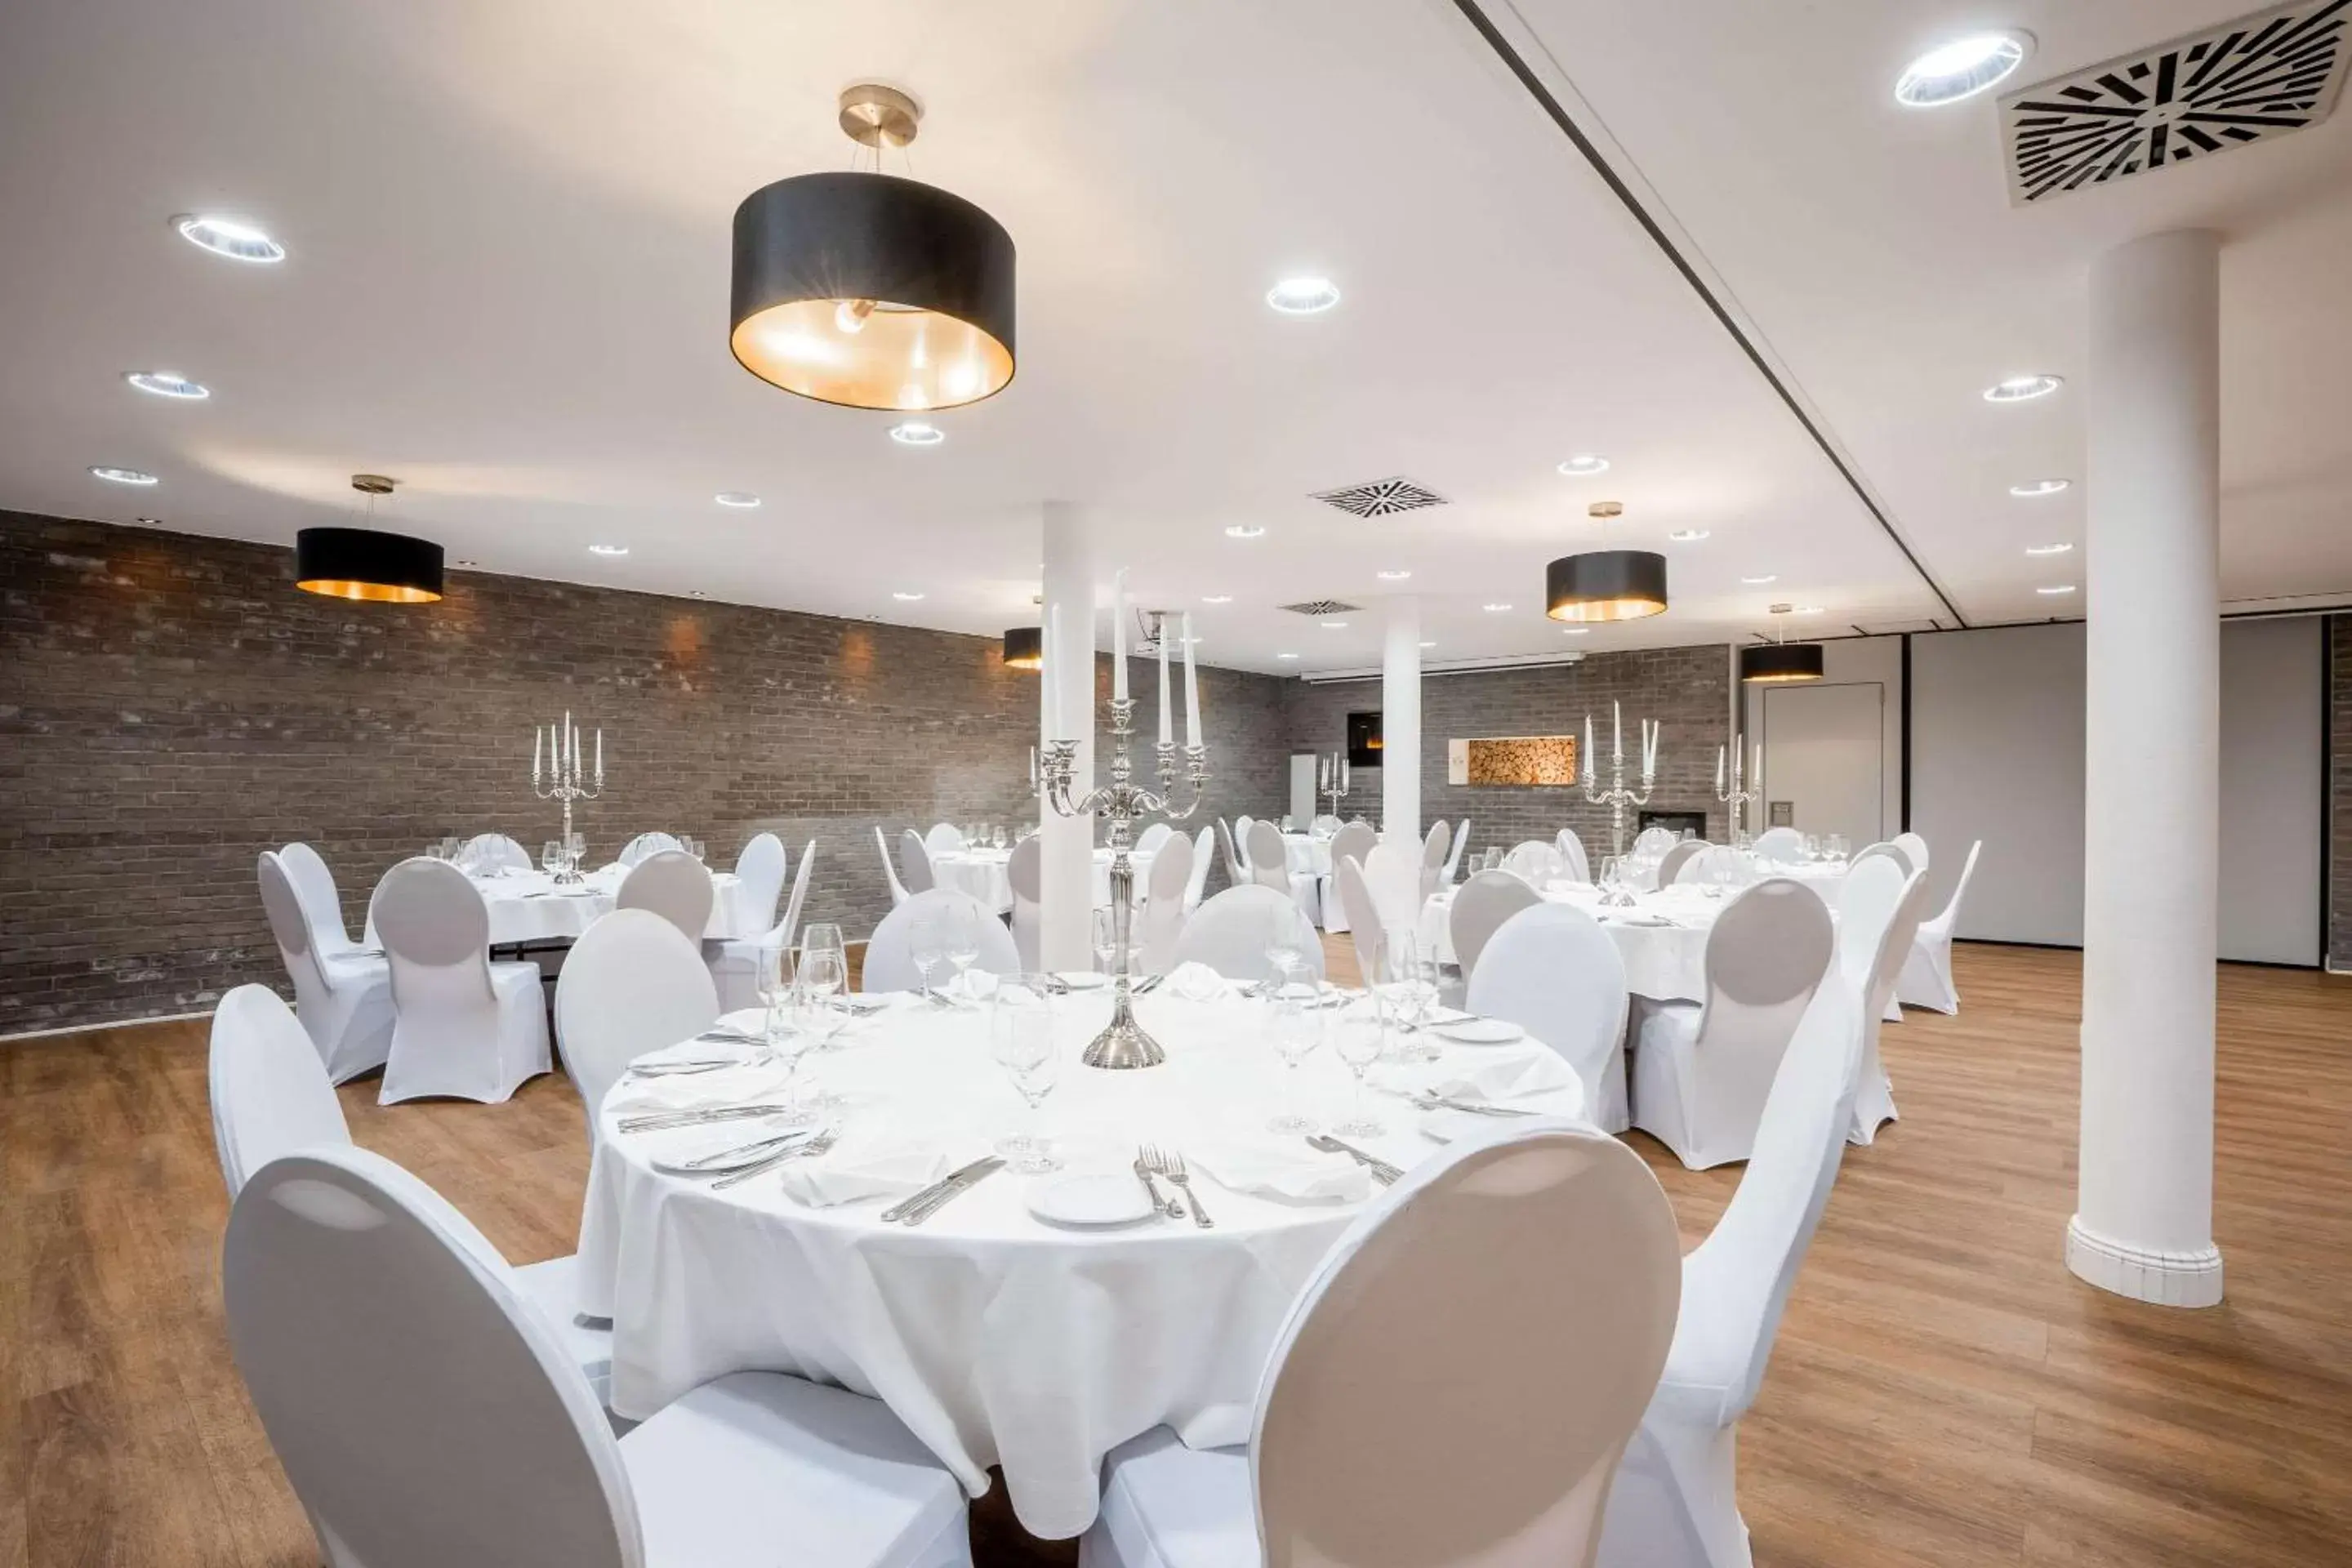 On site, Banquet Facilities in Quality Hotel & Suites Muenchen Messe